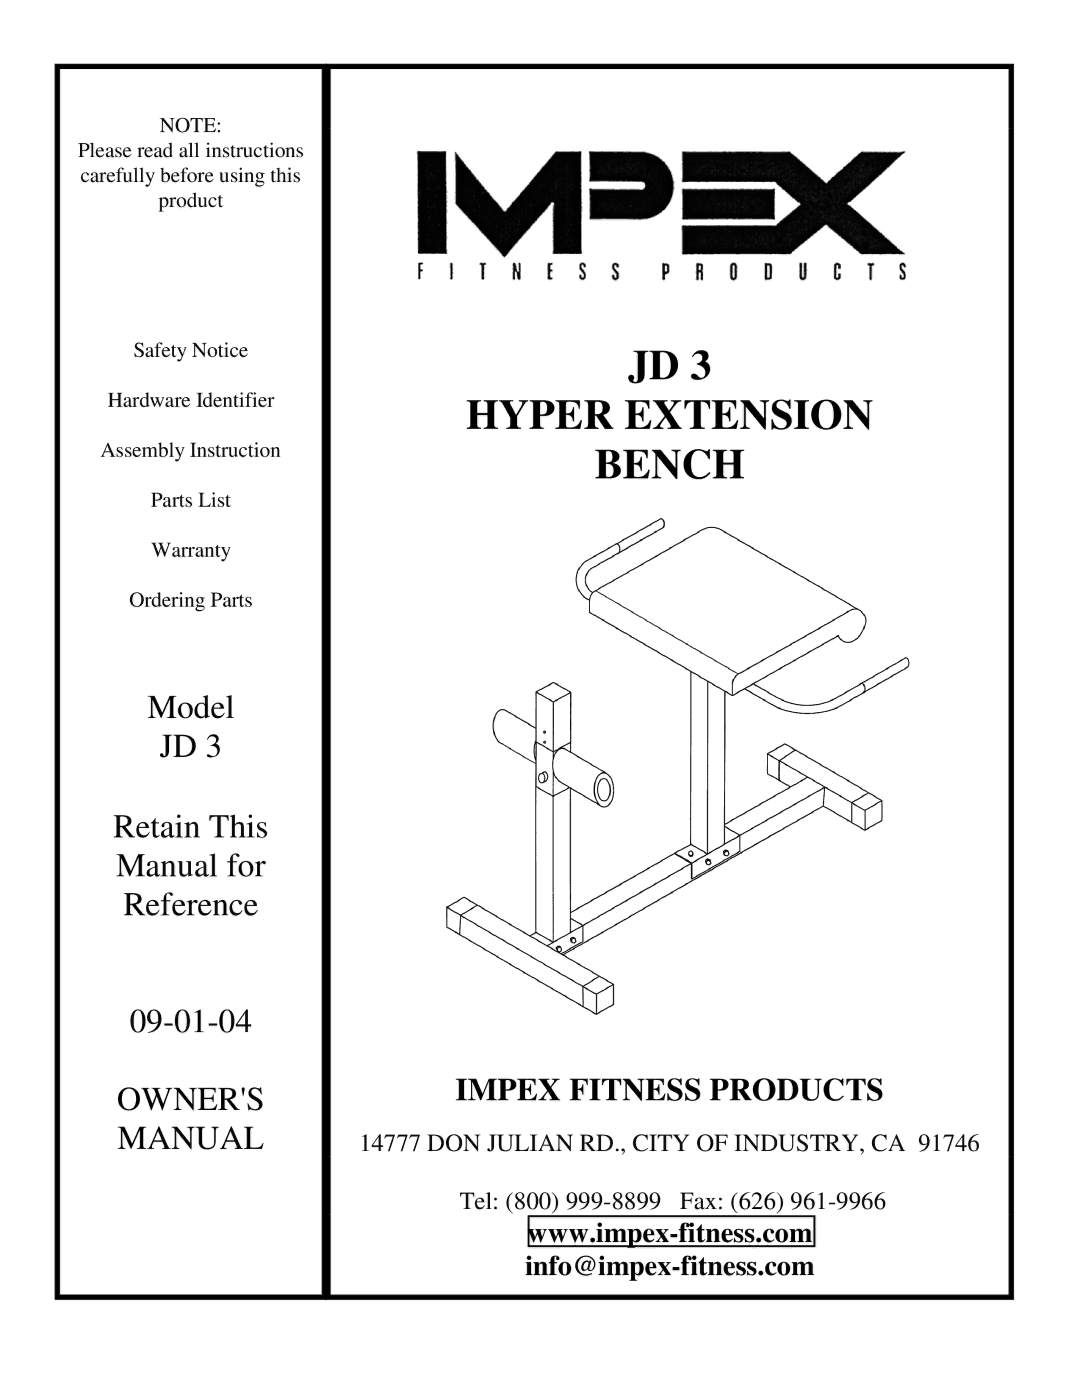 Impex JD 3 manual Hyper Extension 